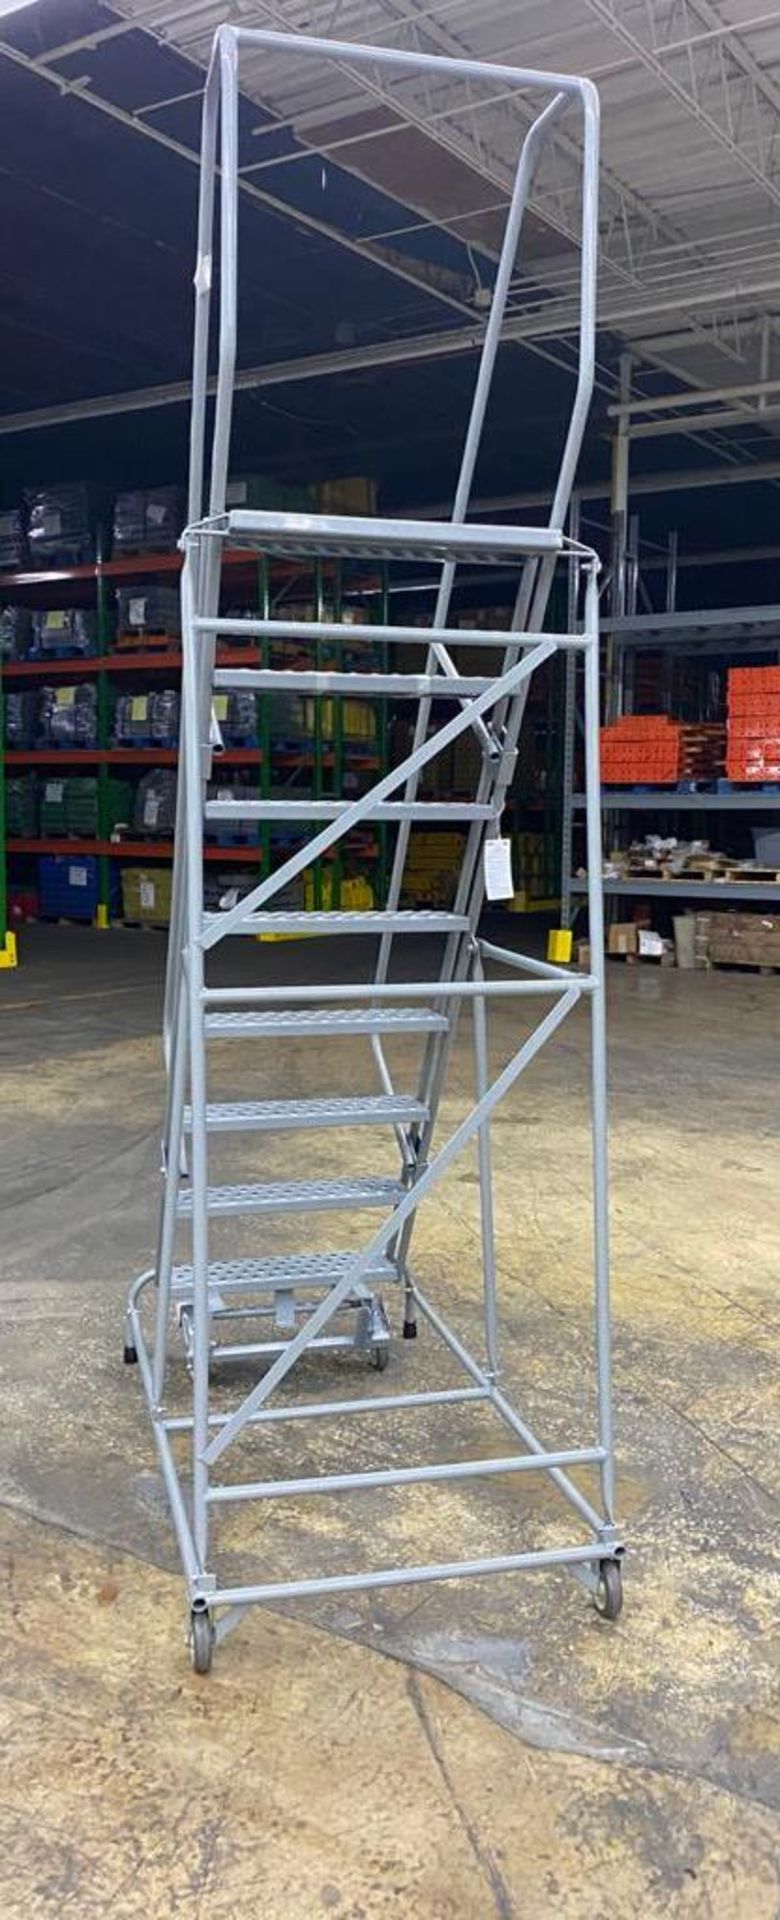 NEW 8 STEP ROLLING LADDER - Image 3 of 4